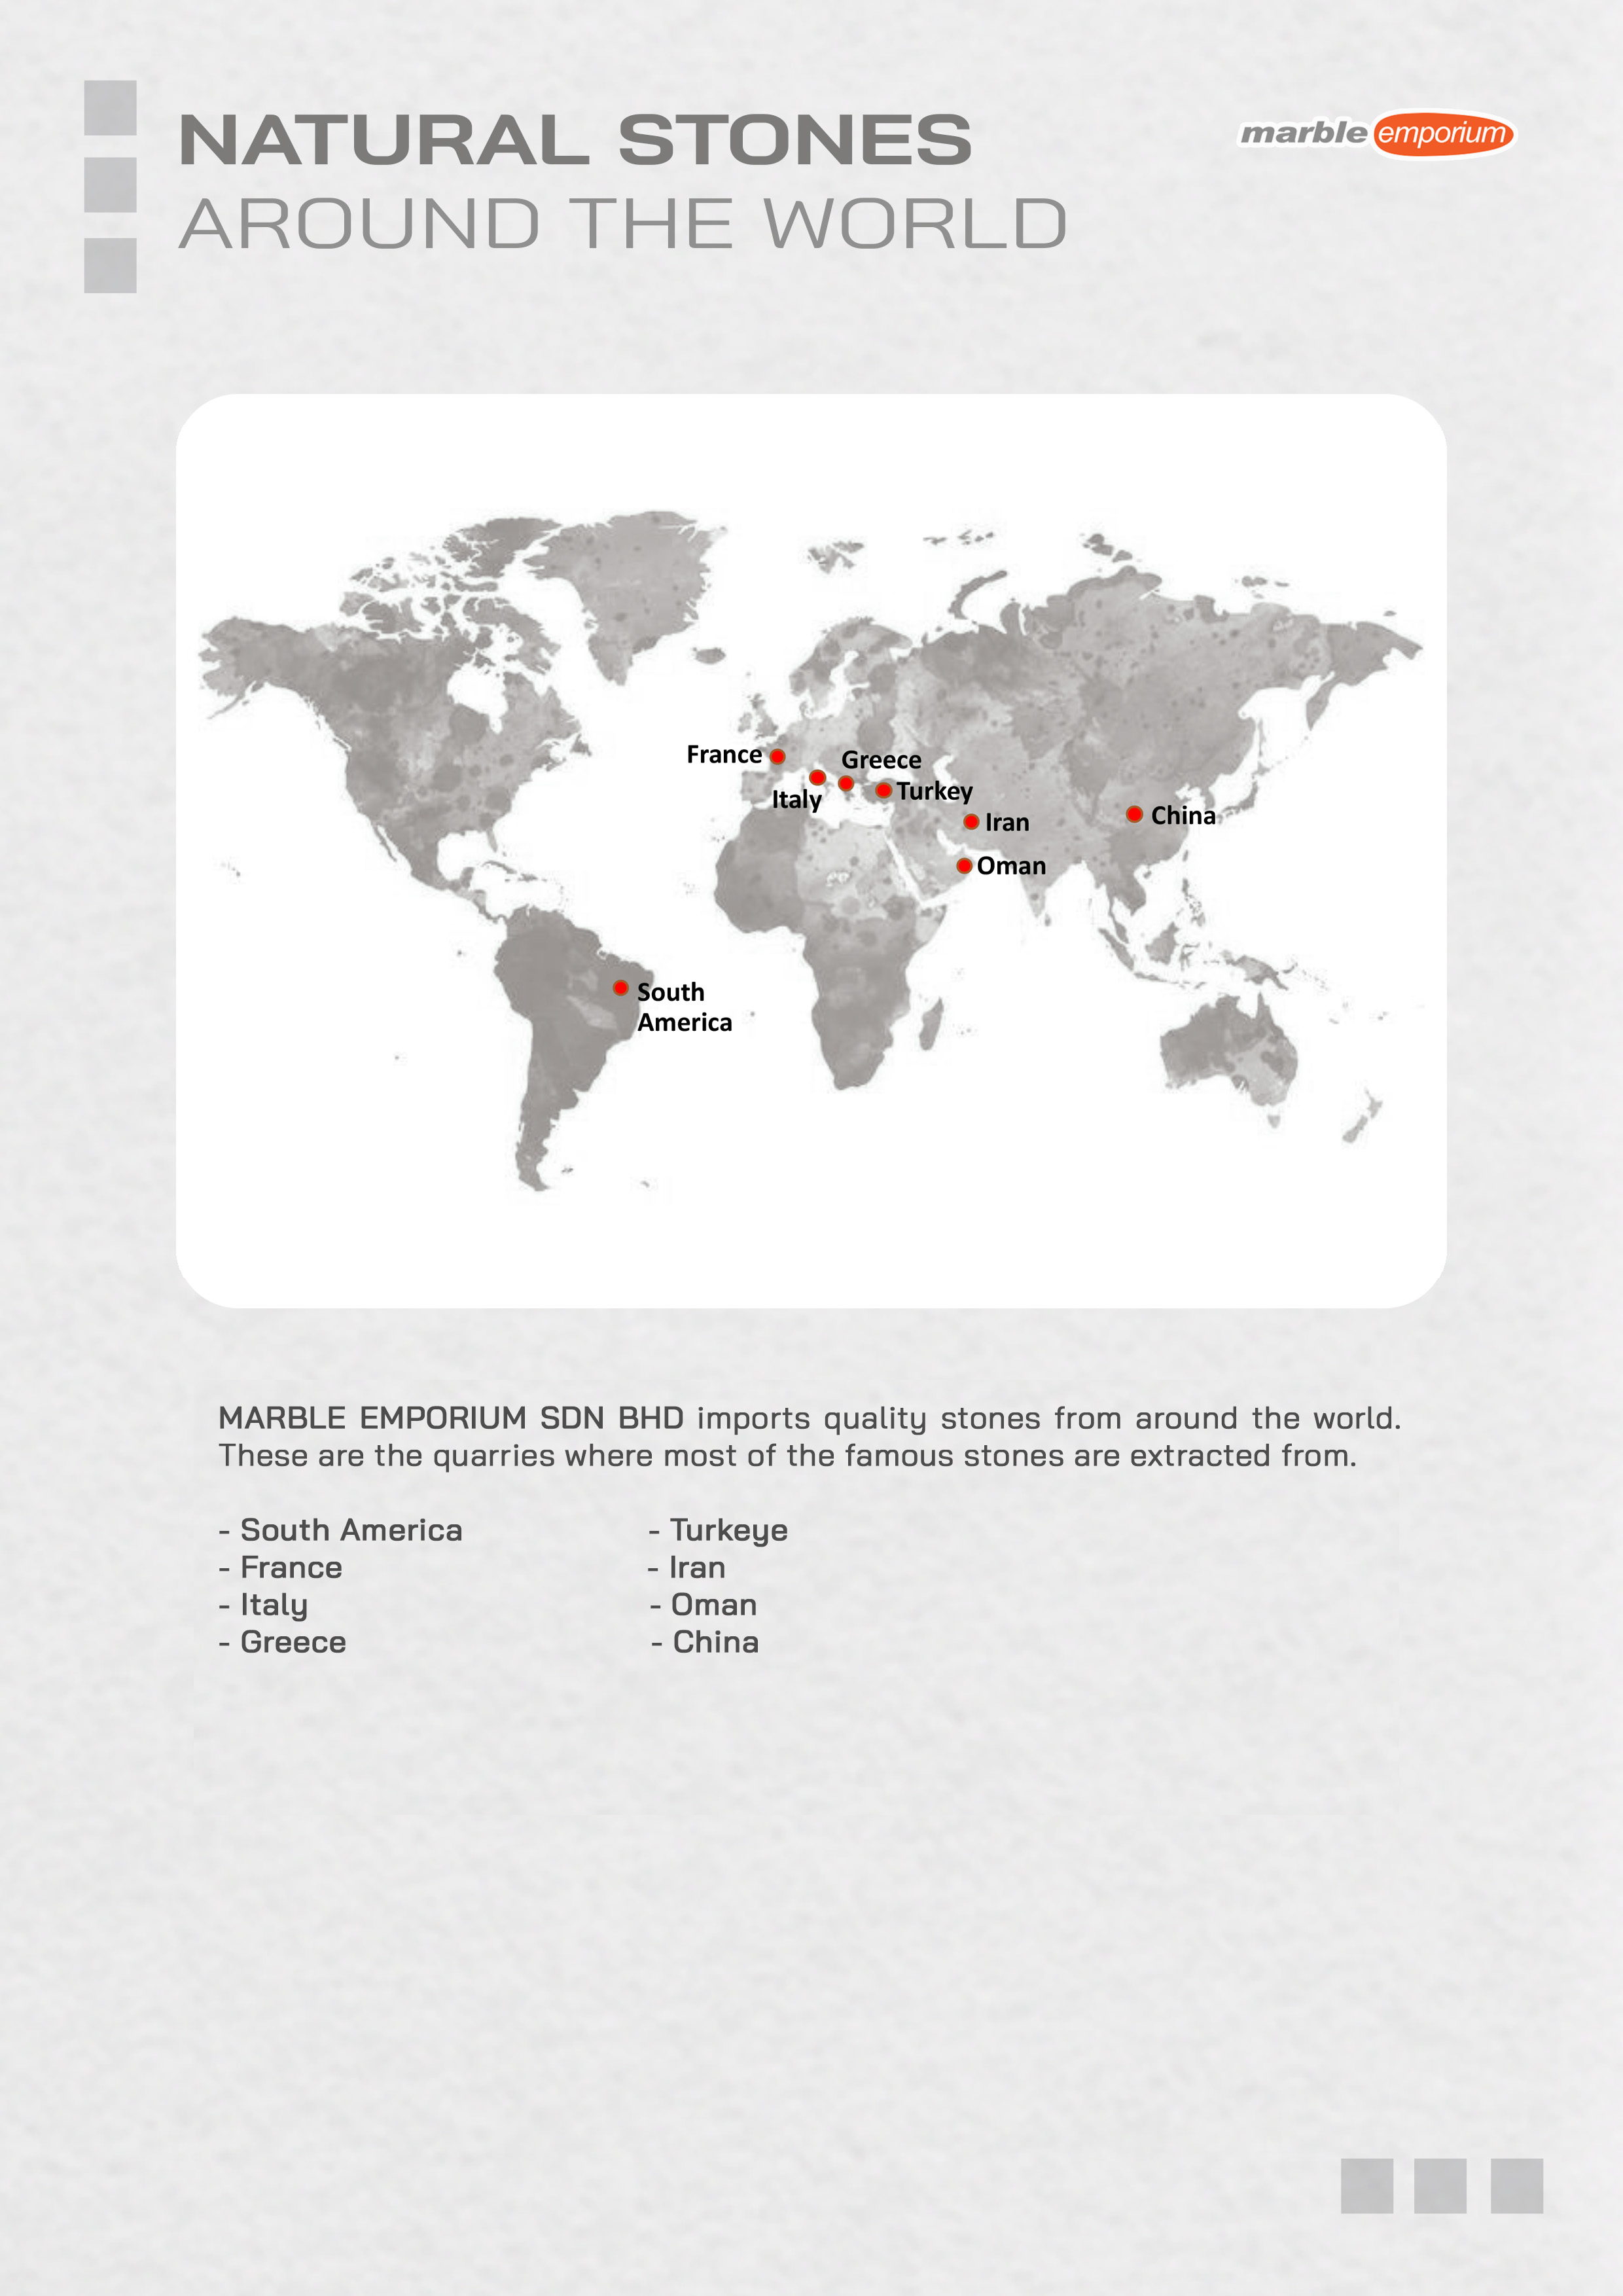 Marble Emporium | How we work page 02 - Natural Stones Around the world | MARBLE EMPORIUM SDN BHD imports quality stones from around the world. These are the quarries where most of the famous stones are extracted from. | South America, Turkey, France, Iran, Italy, Oman, Greece, China